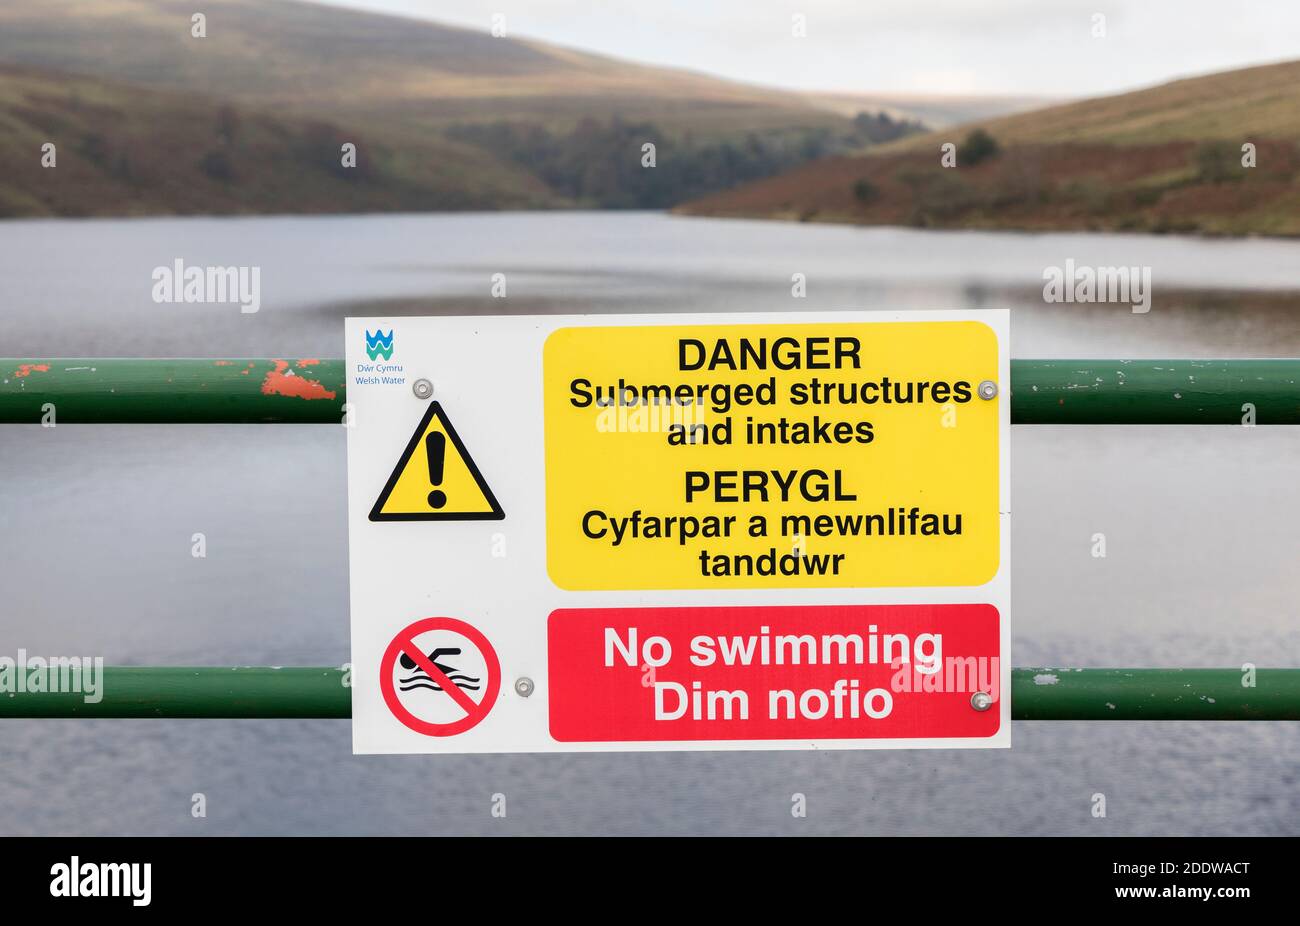 Warning sign of submerged structures in Welsh and English with No Swimming on dam, Grwyne Fawr reservoir, Wales, UK Stock Photo